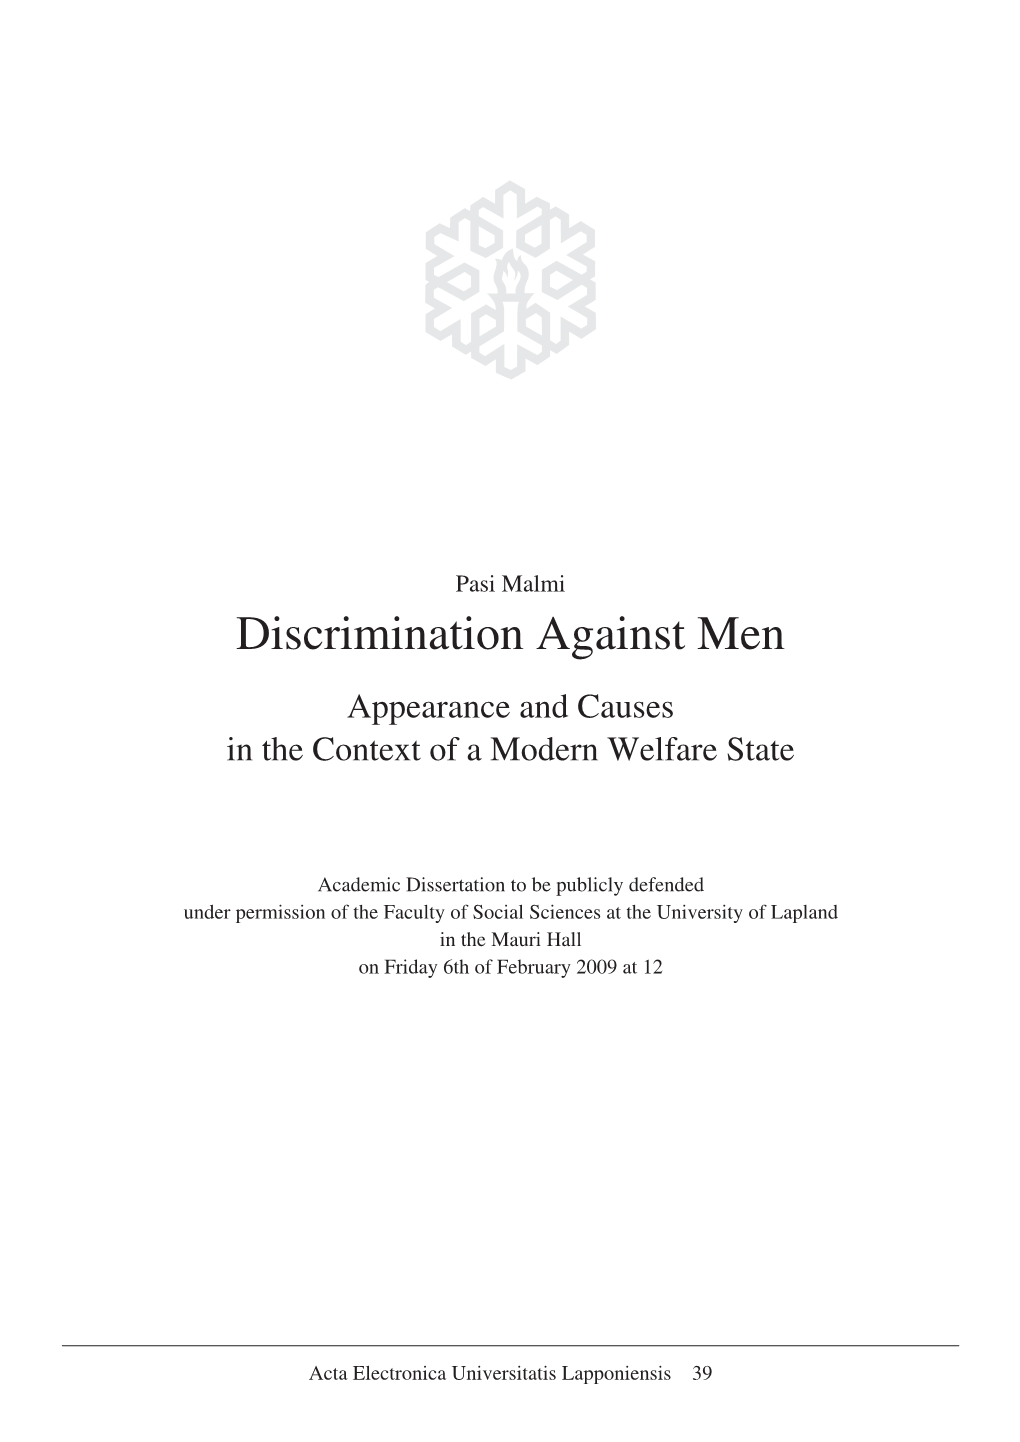 Discrimination Against Men Appearance and Causes in the Context of a Modern Welfare State